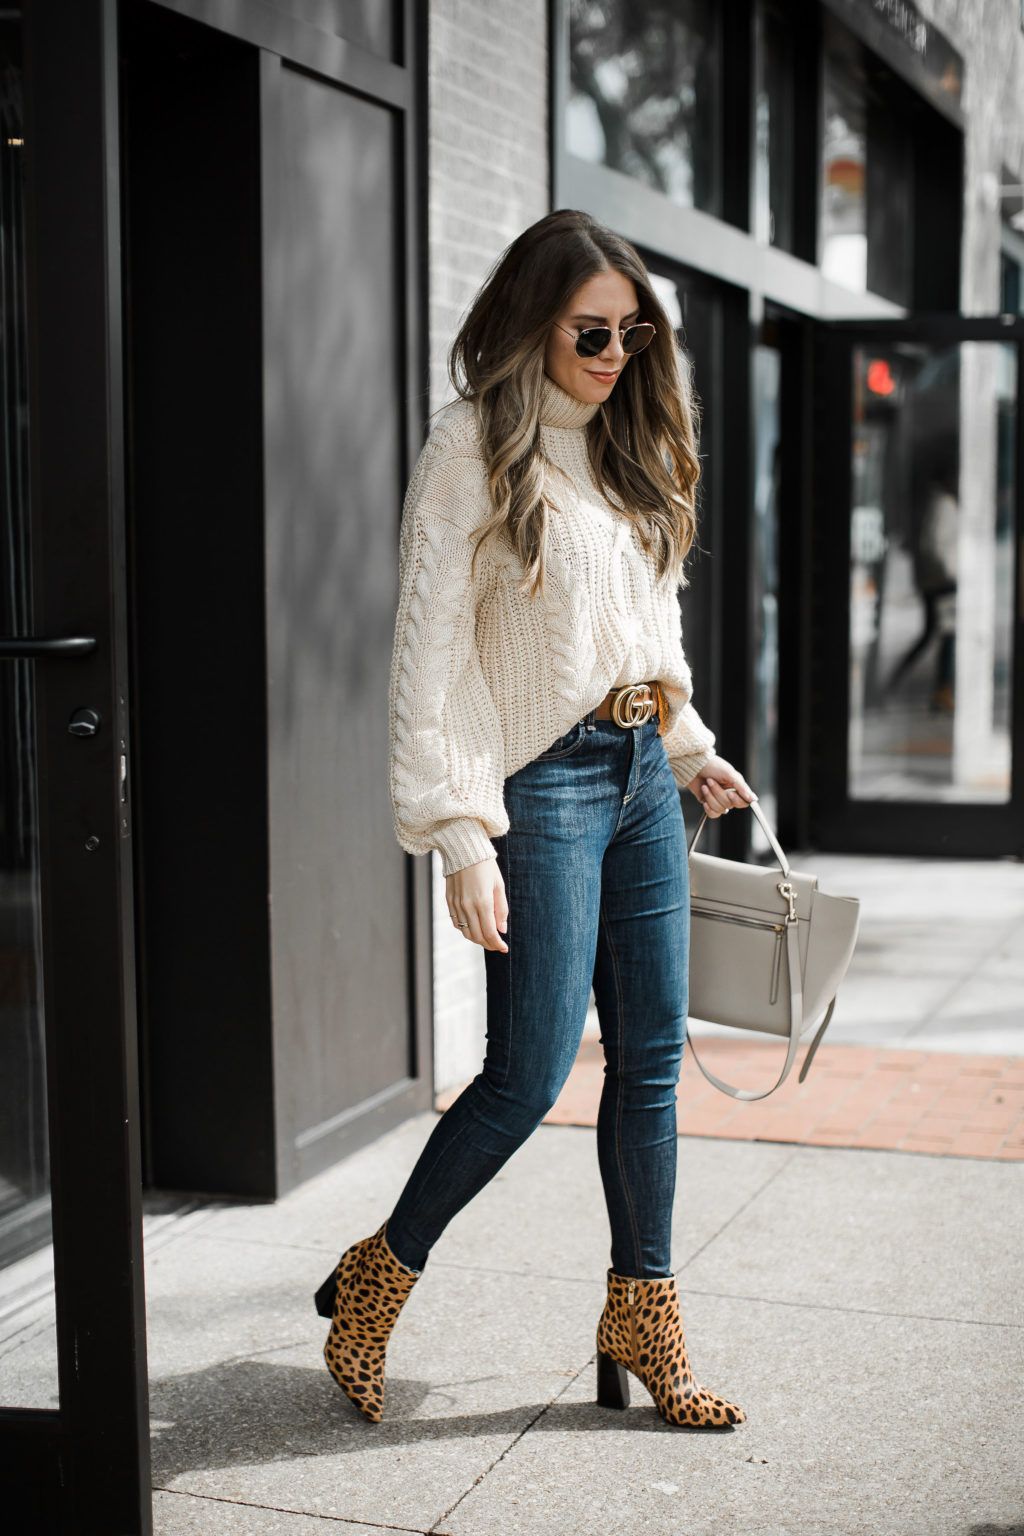 All the Neutral Chunky Knits I'm Loving Right Now | The Teacher Diva: a Dallas Fashion Blog featurin - All the Neutral Chunky Knits I'm Loving Right Now | The Teacher Diva: a Dallas Fashion Blog featurin -   13 style Inspiration everyday ideas